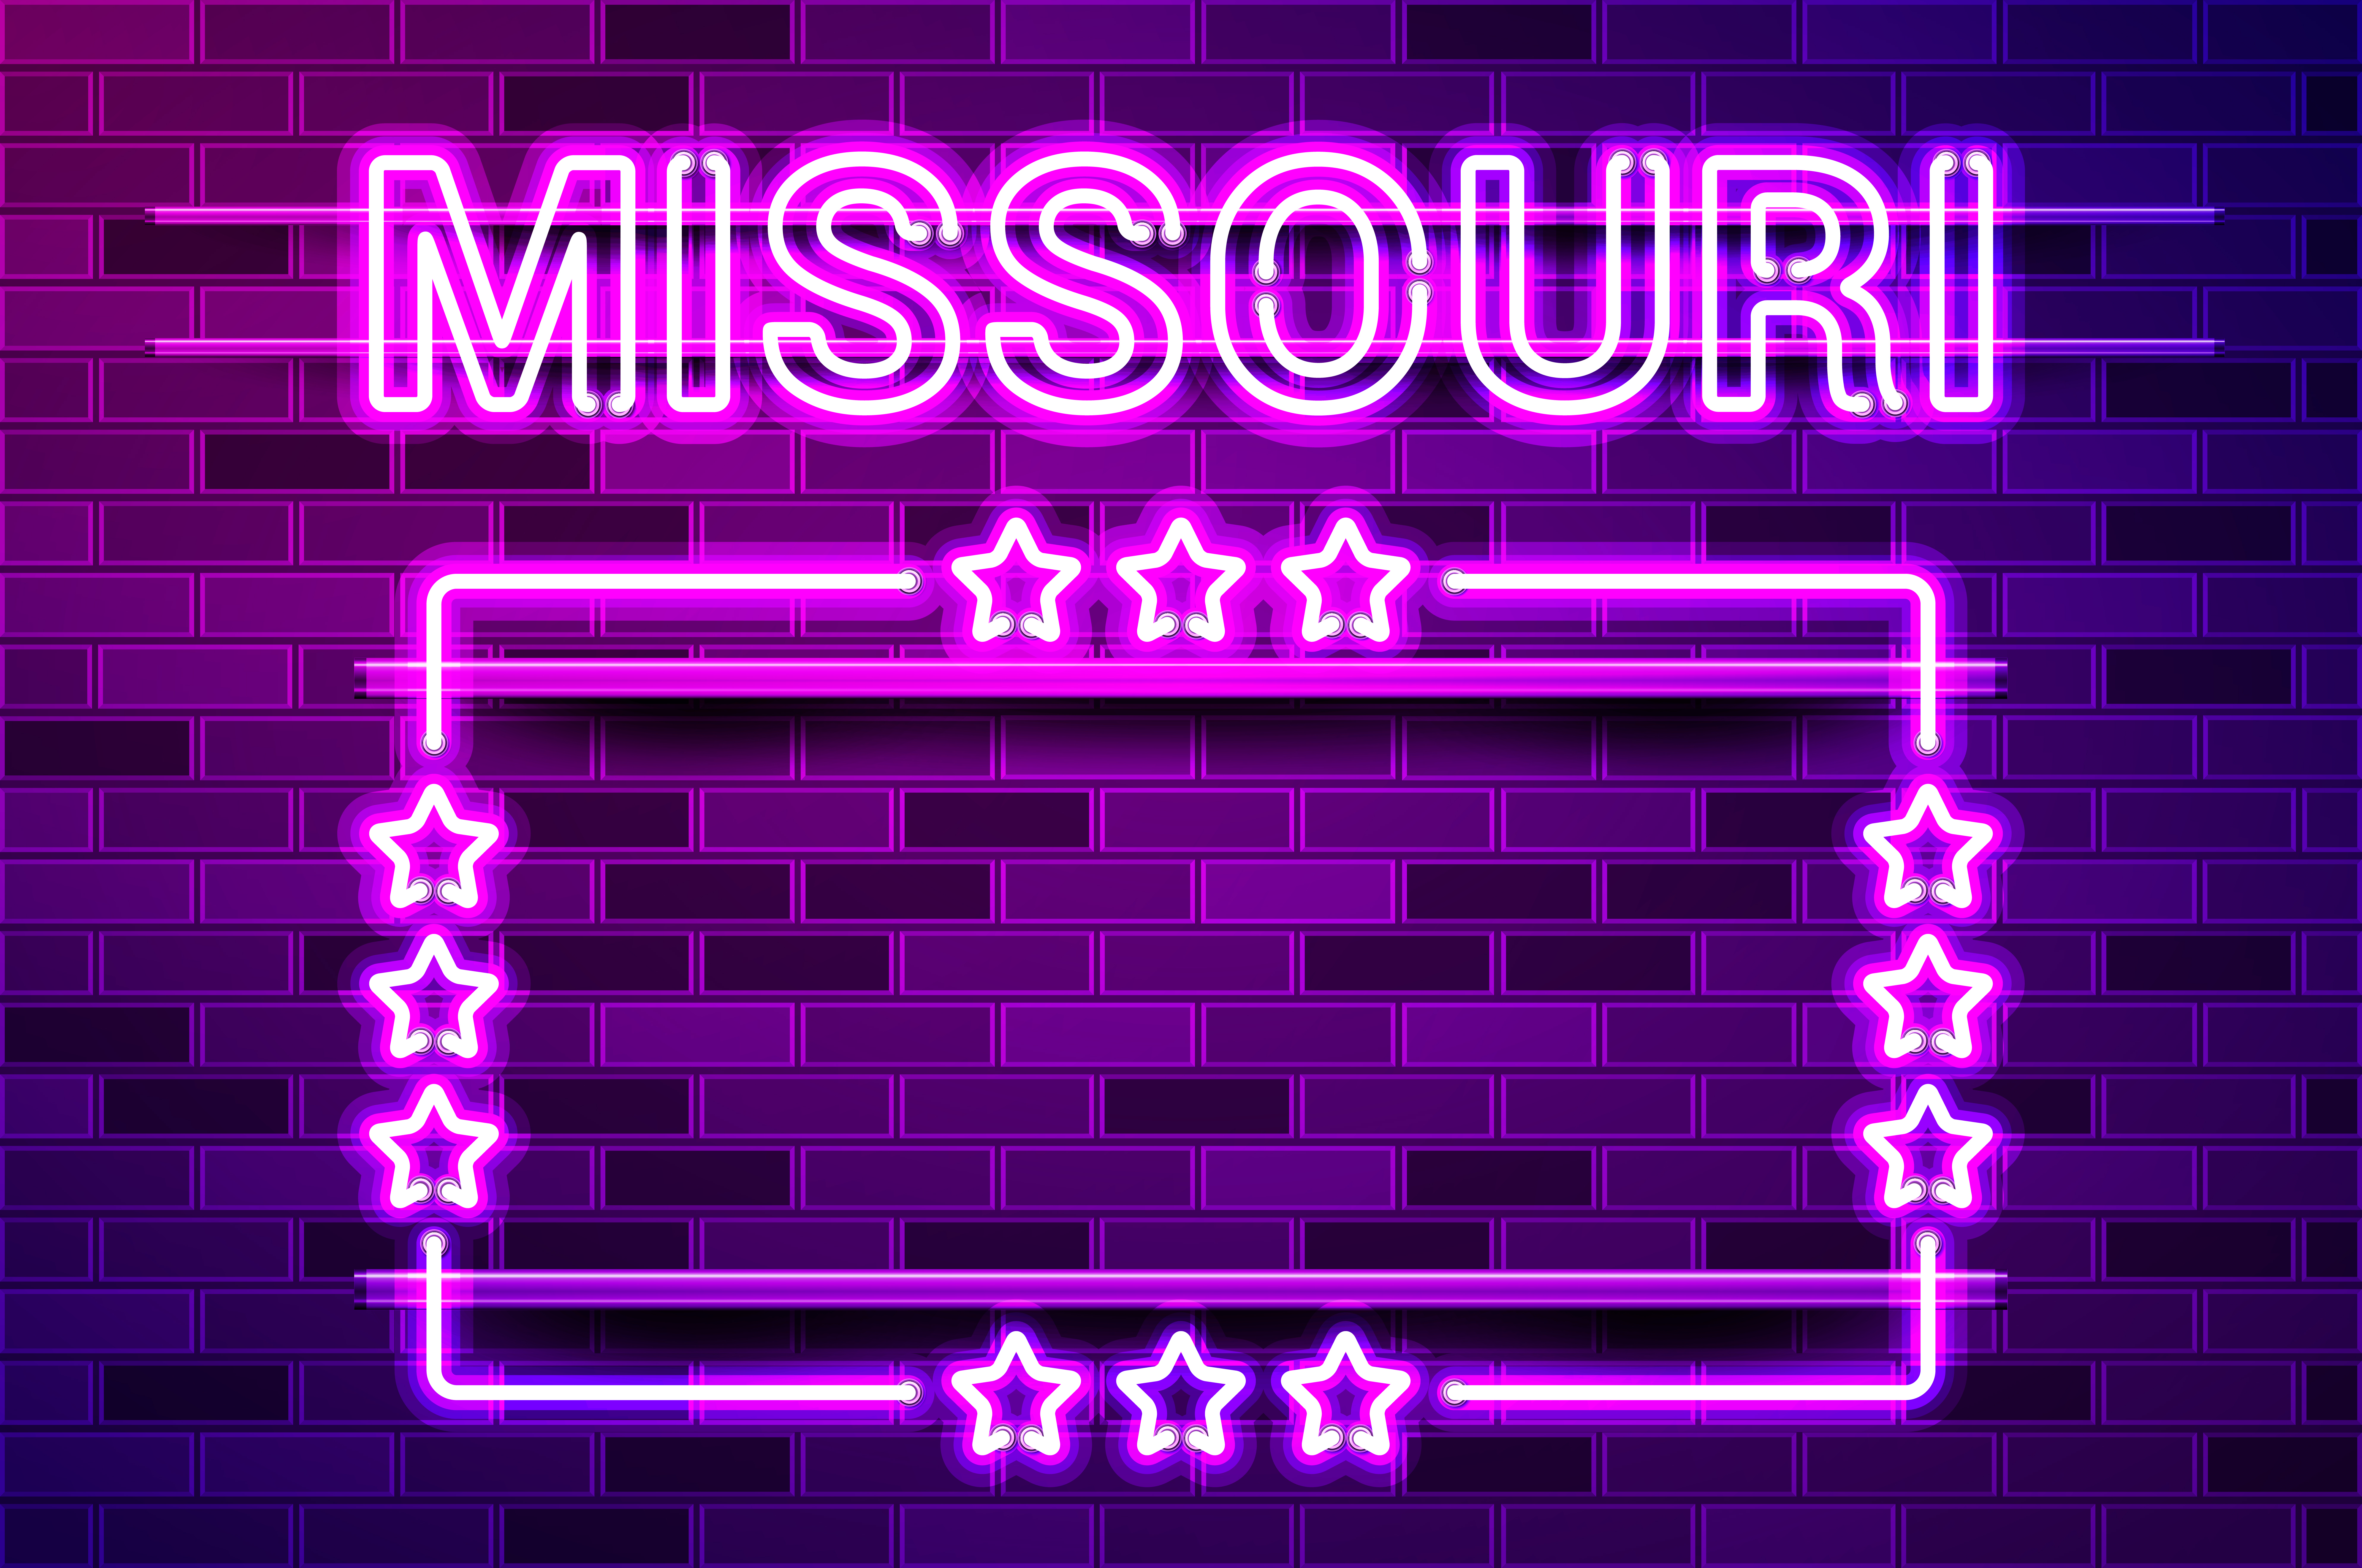 Missouri US State glowing purple neon lettering and a rectangular frame with stars. Realistic vector illustration. Purple brick wall, violet glow, metal holders.. Missouri US State glowing purple neon lettering and a rectangular frame with stars